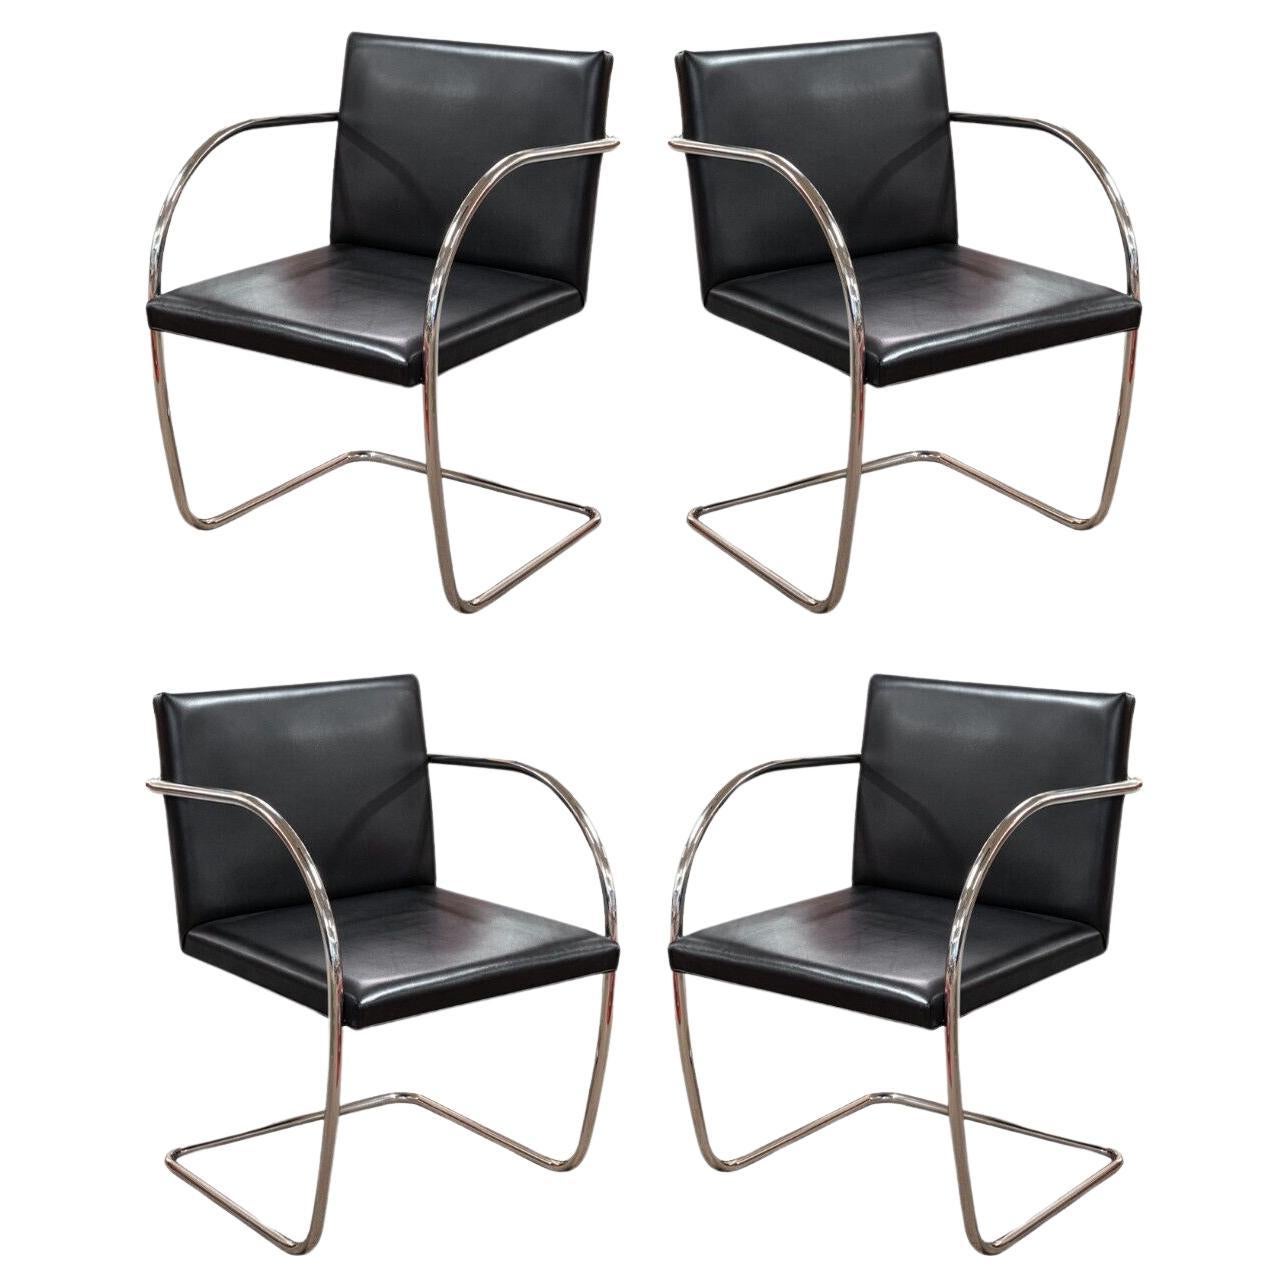 Set of 4 Mies van der Rohe for Knoll Tubular Black Leather Brno MCM Chairs For Sale